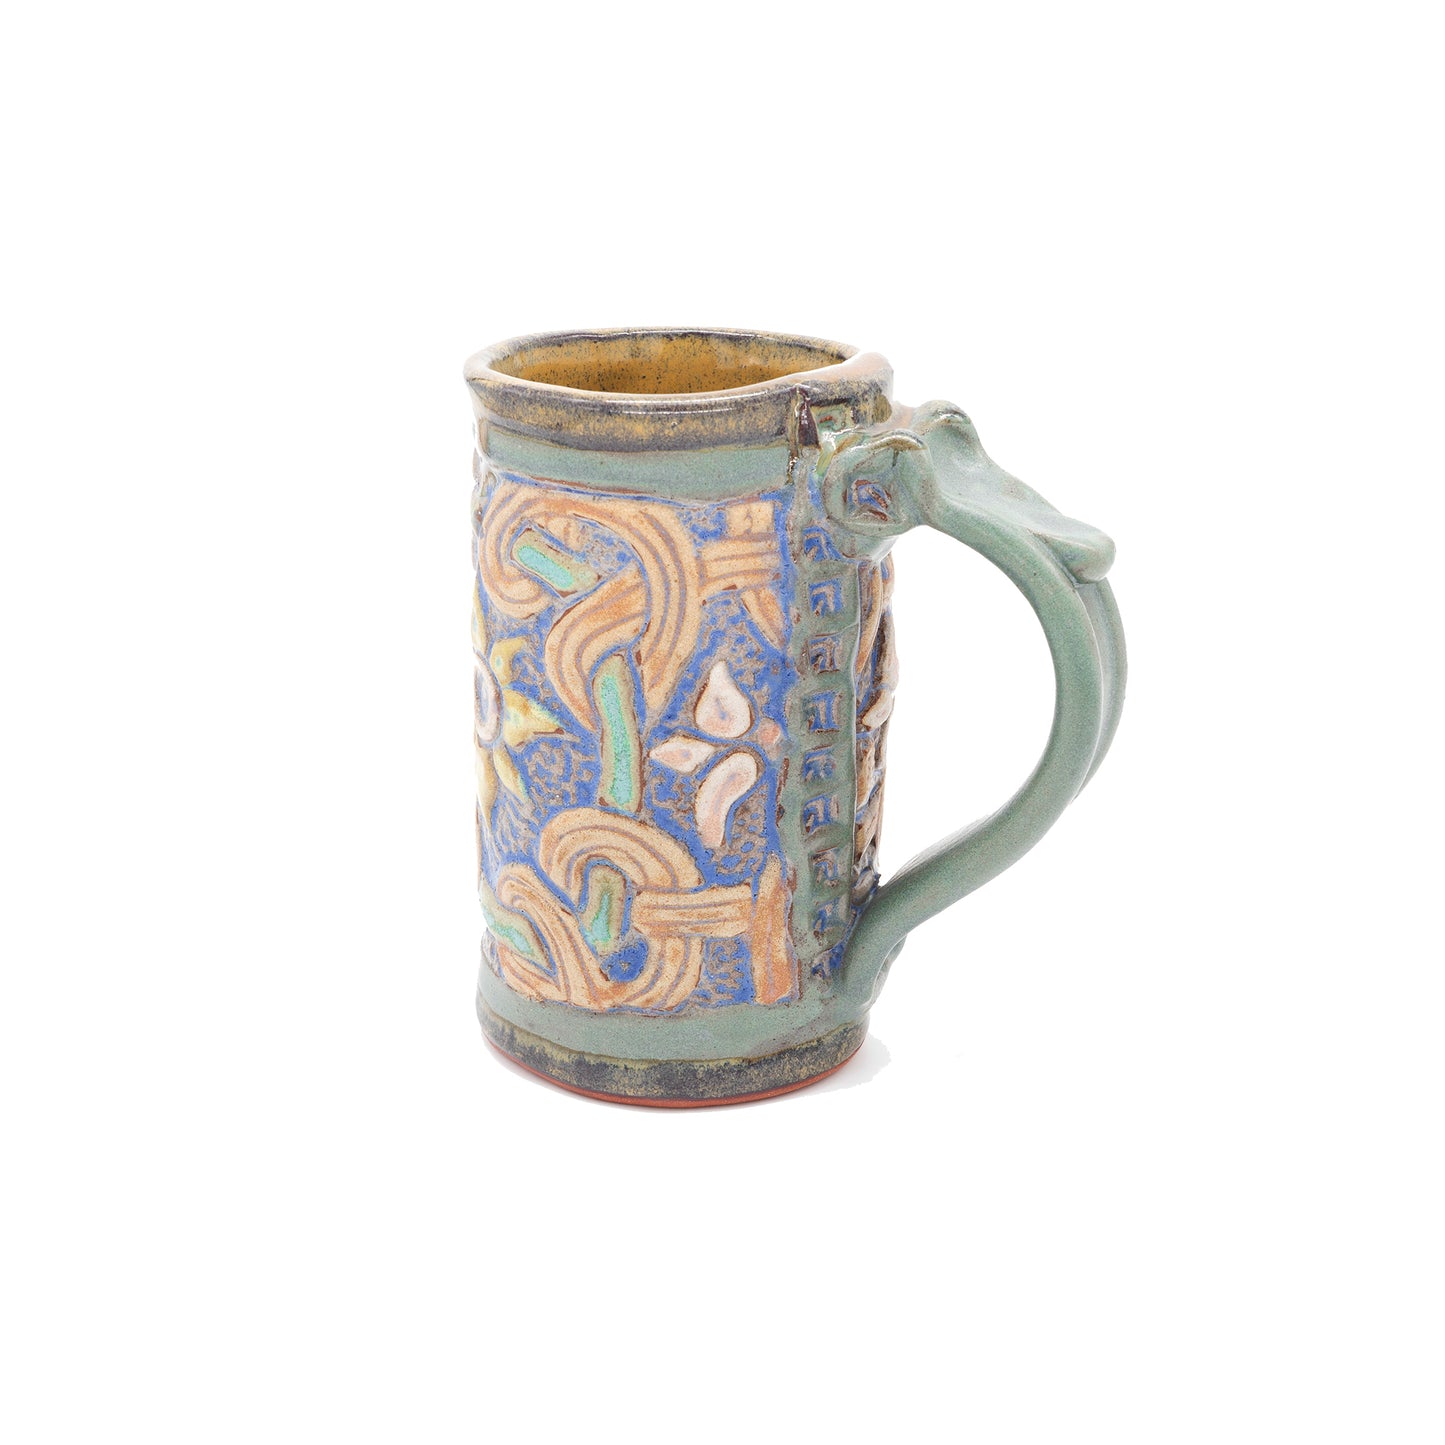 Mug with 3d Flowers and Knots Pattern